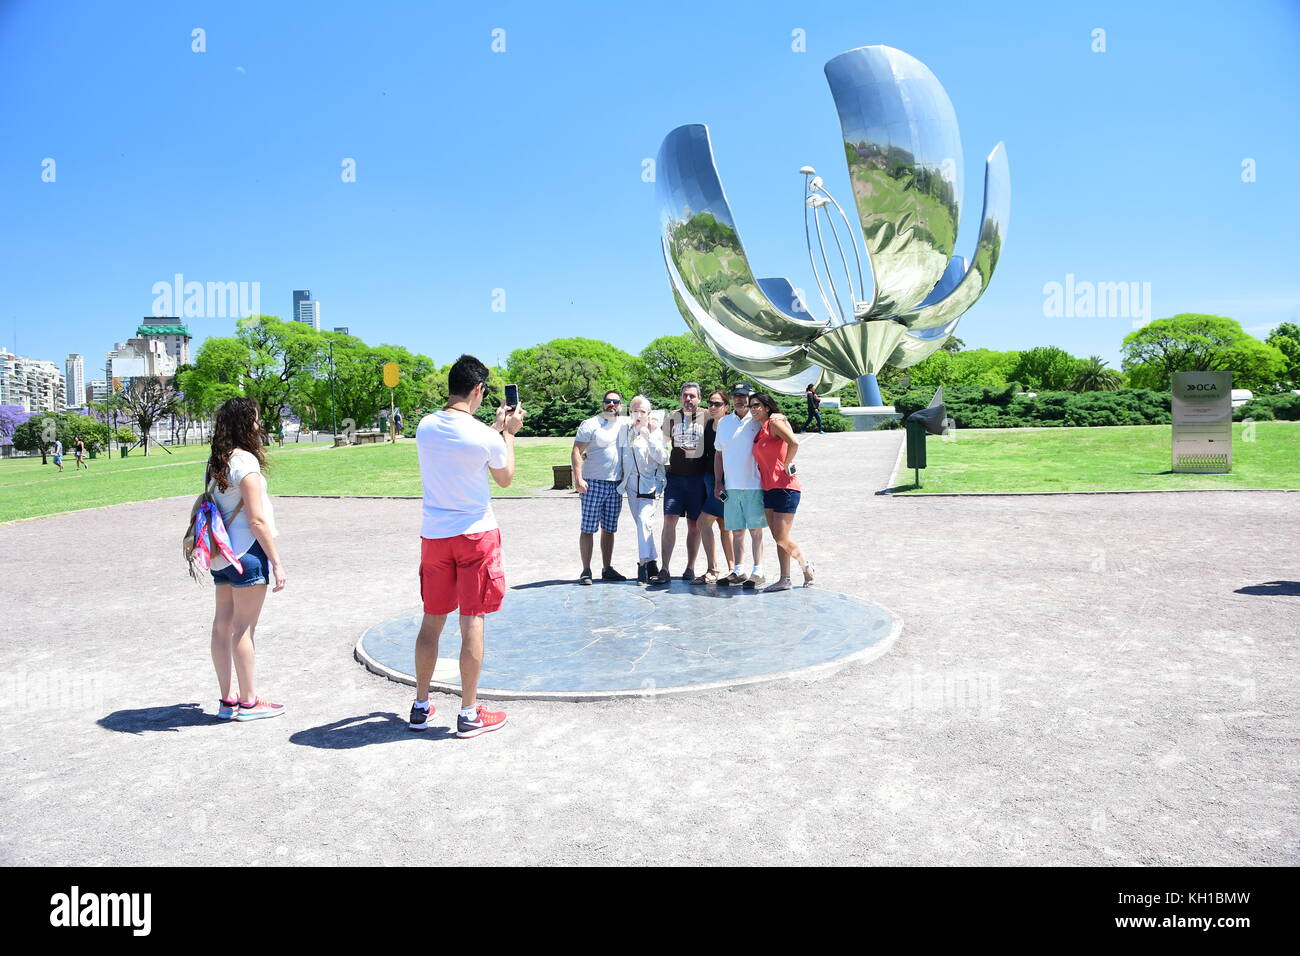 View of Floralis Generica in Recoleta, Buenos Aires, Argentina on beautiful spring day Stock Photo